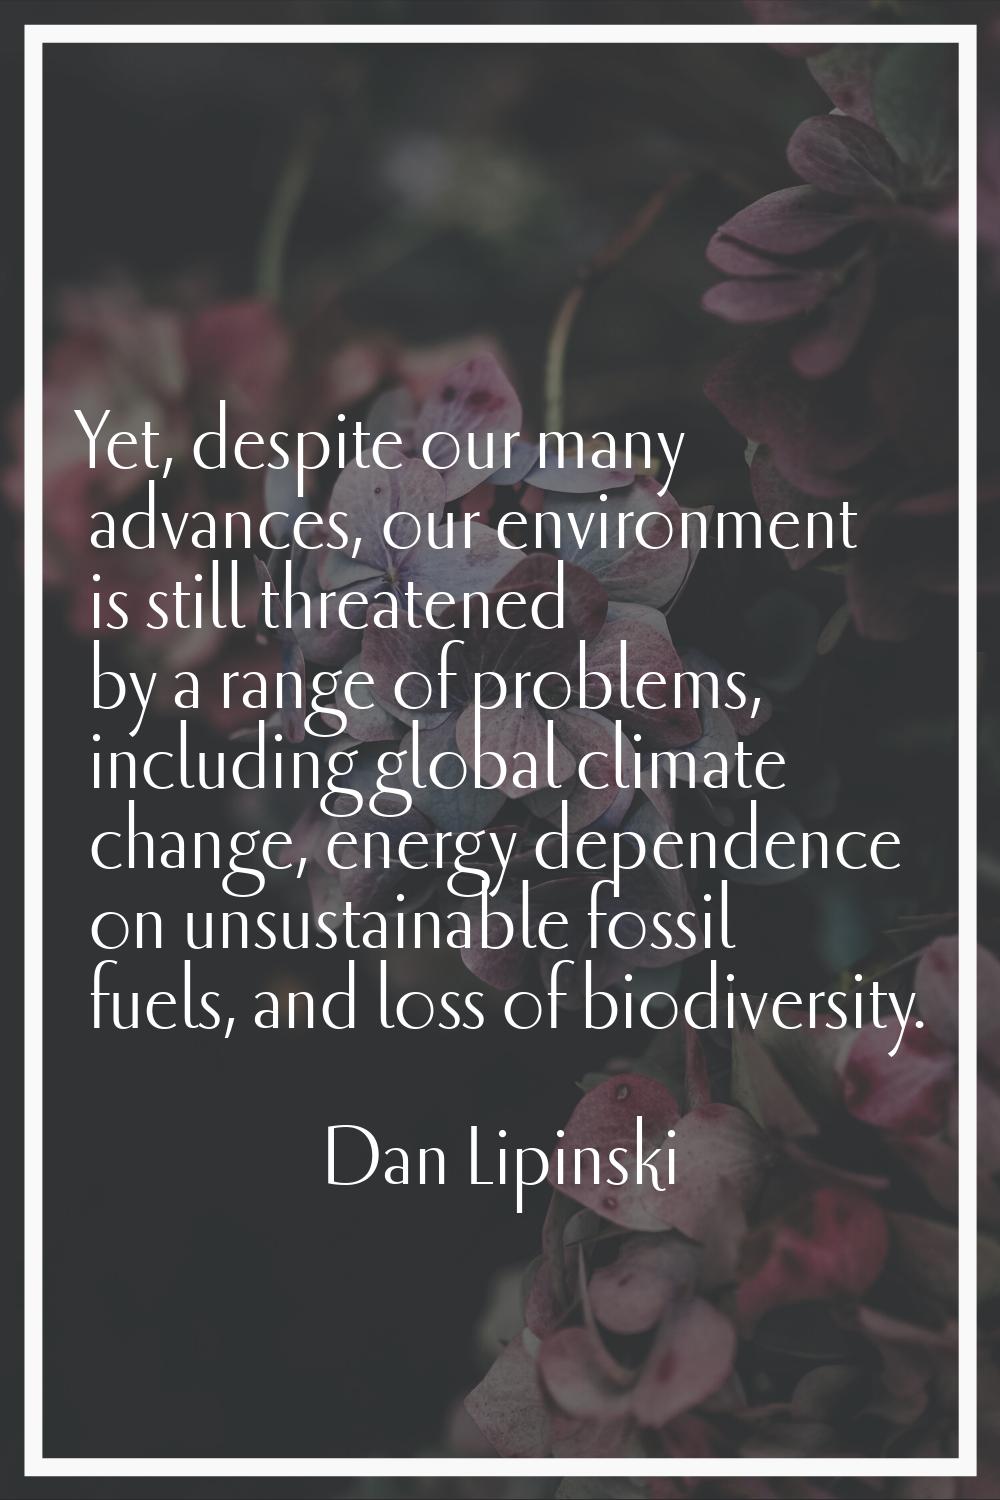 Yet, despite our many advances, our environment is still threatened by a range of problems, includi